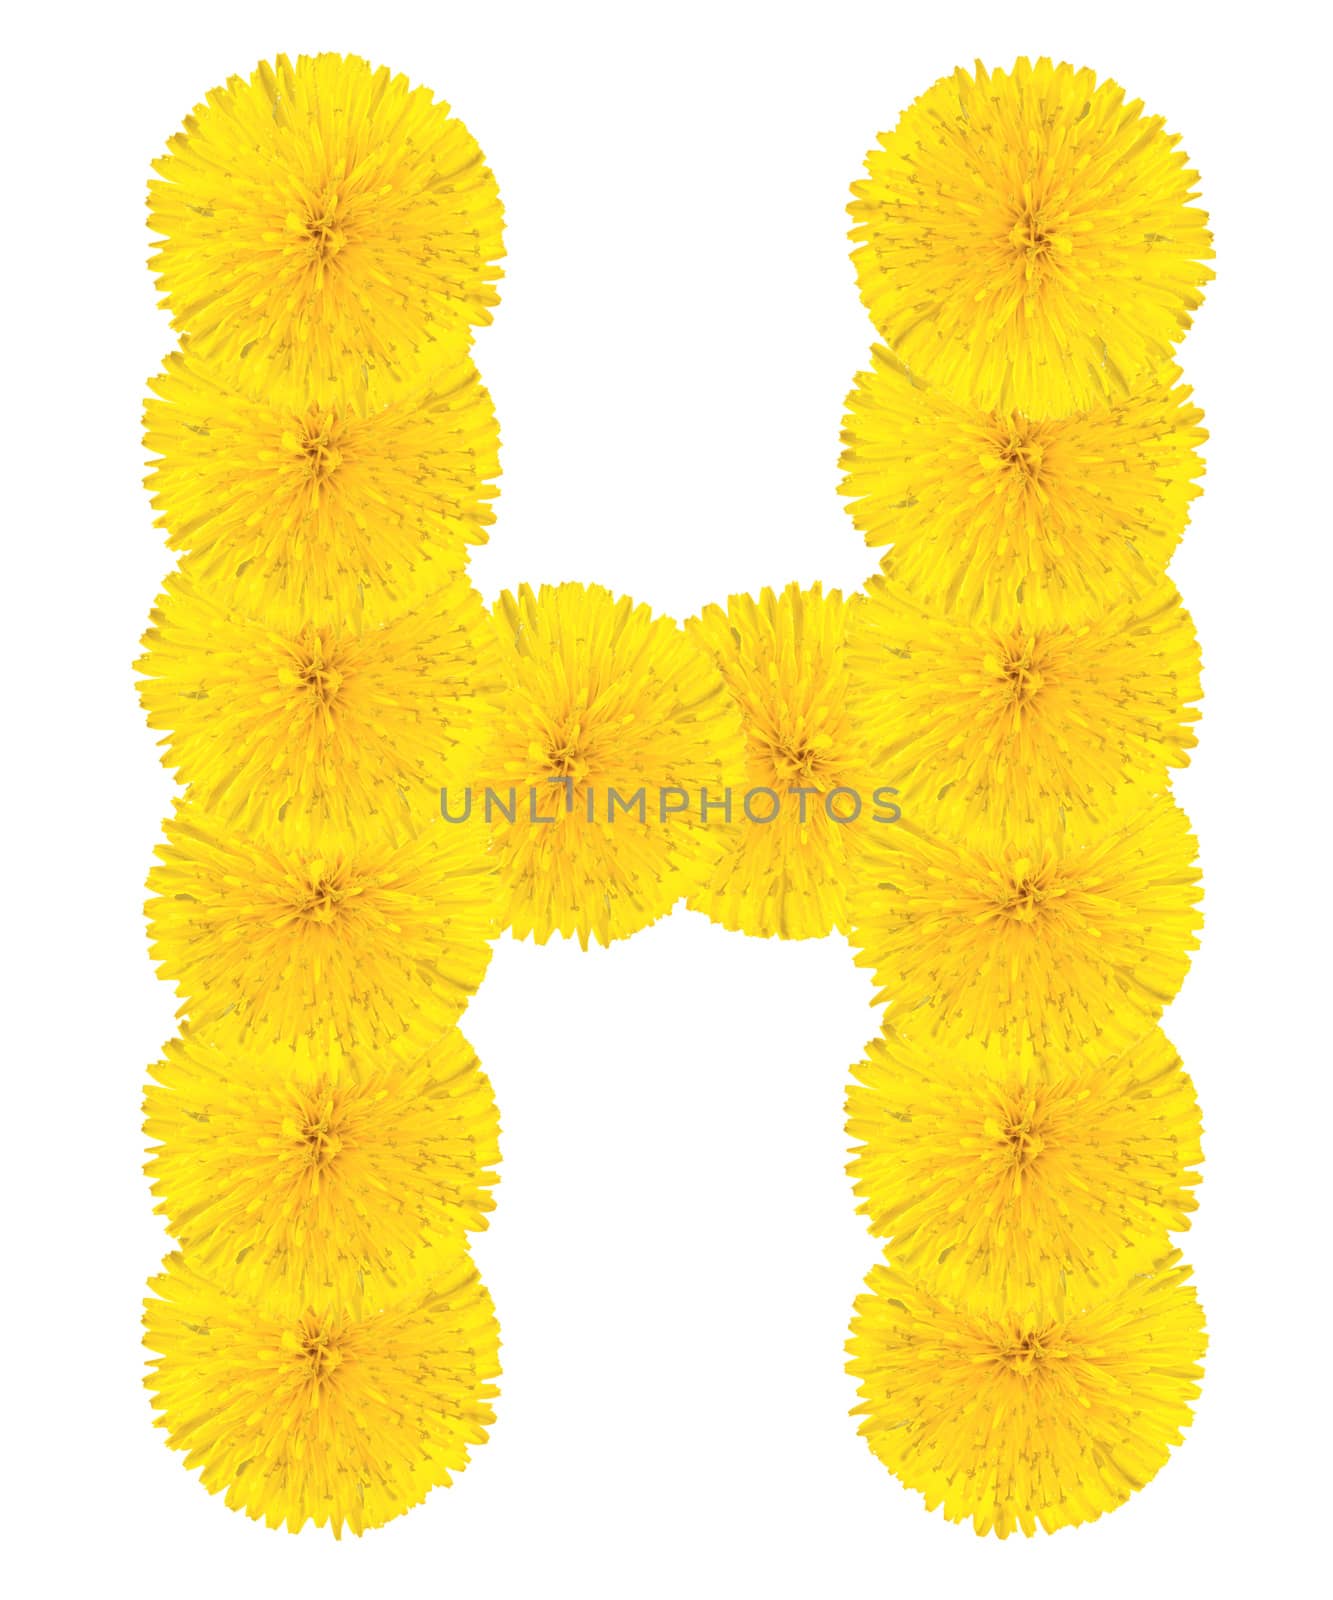 Letter H made from dandelions by Valengilda